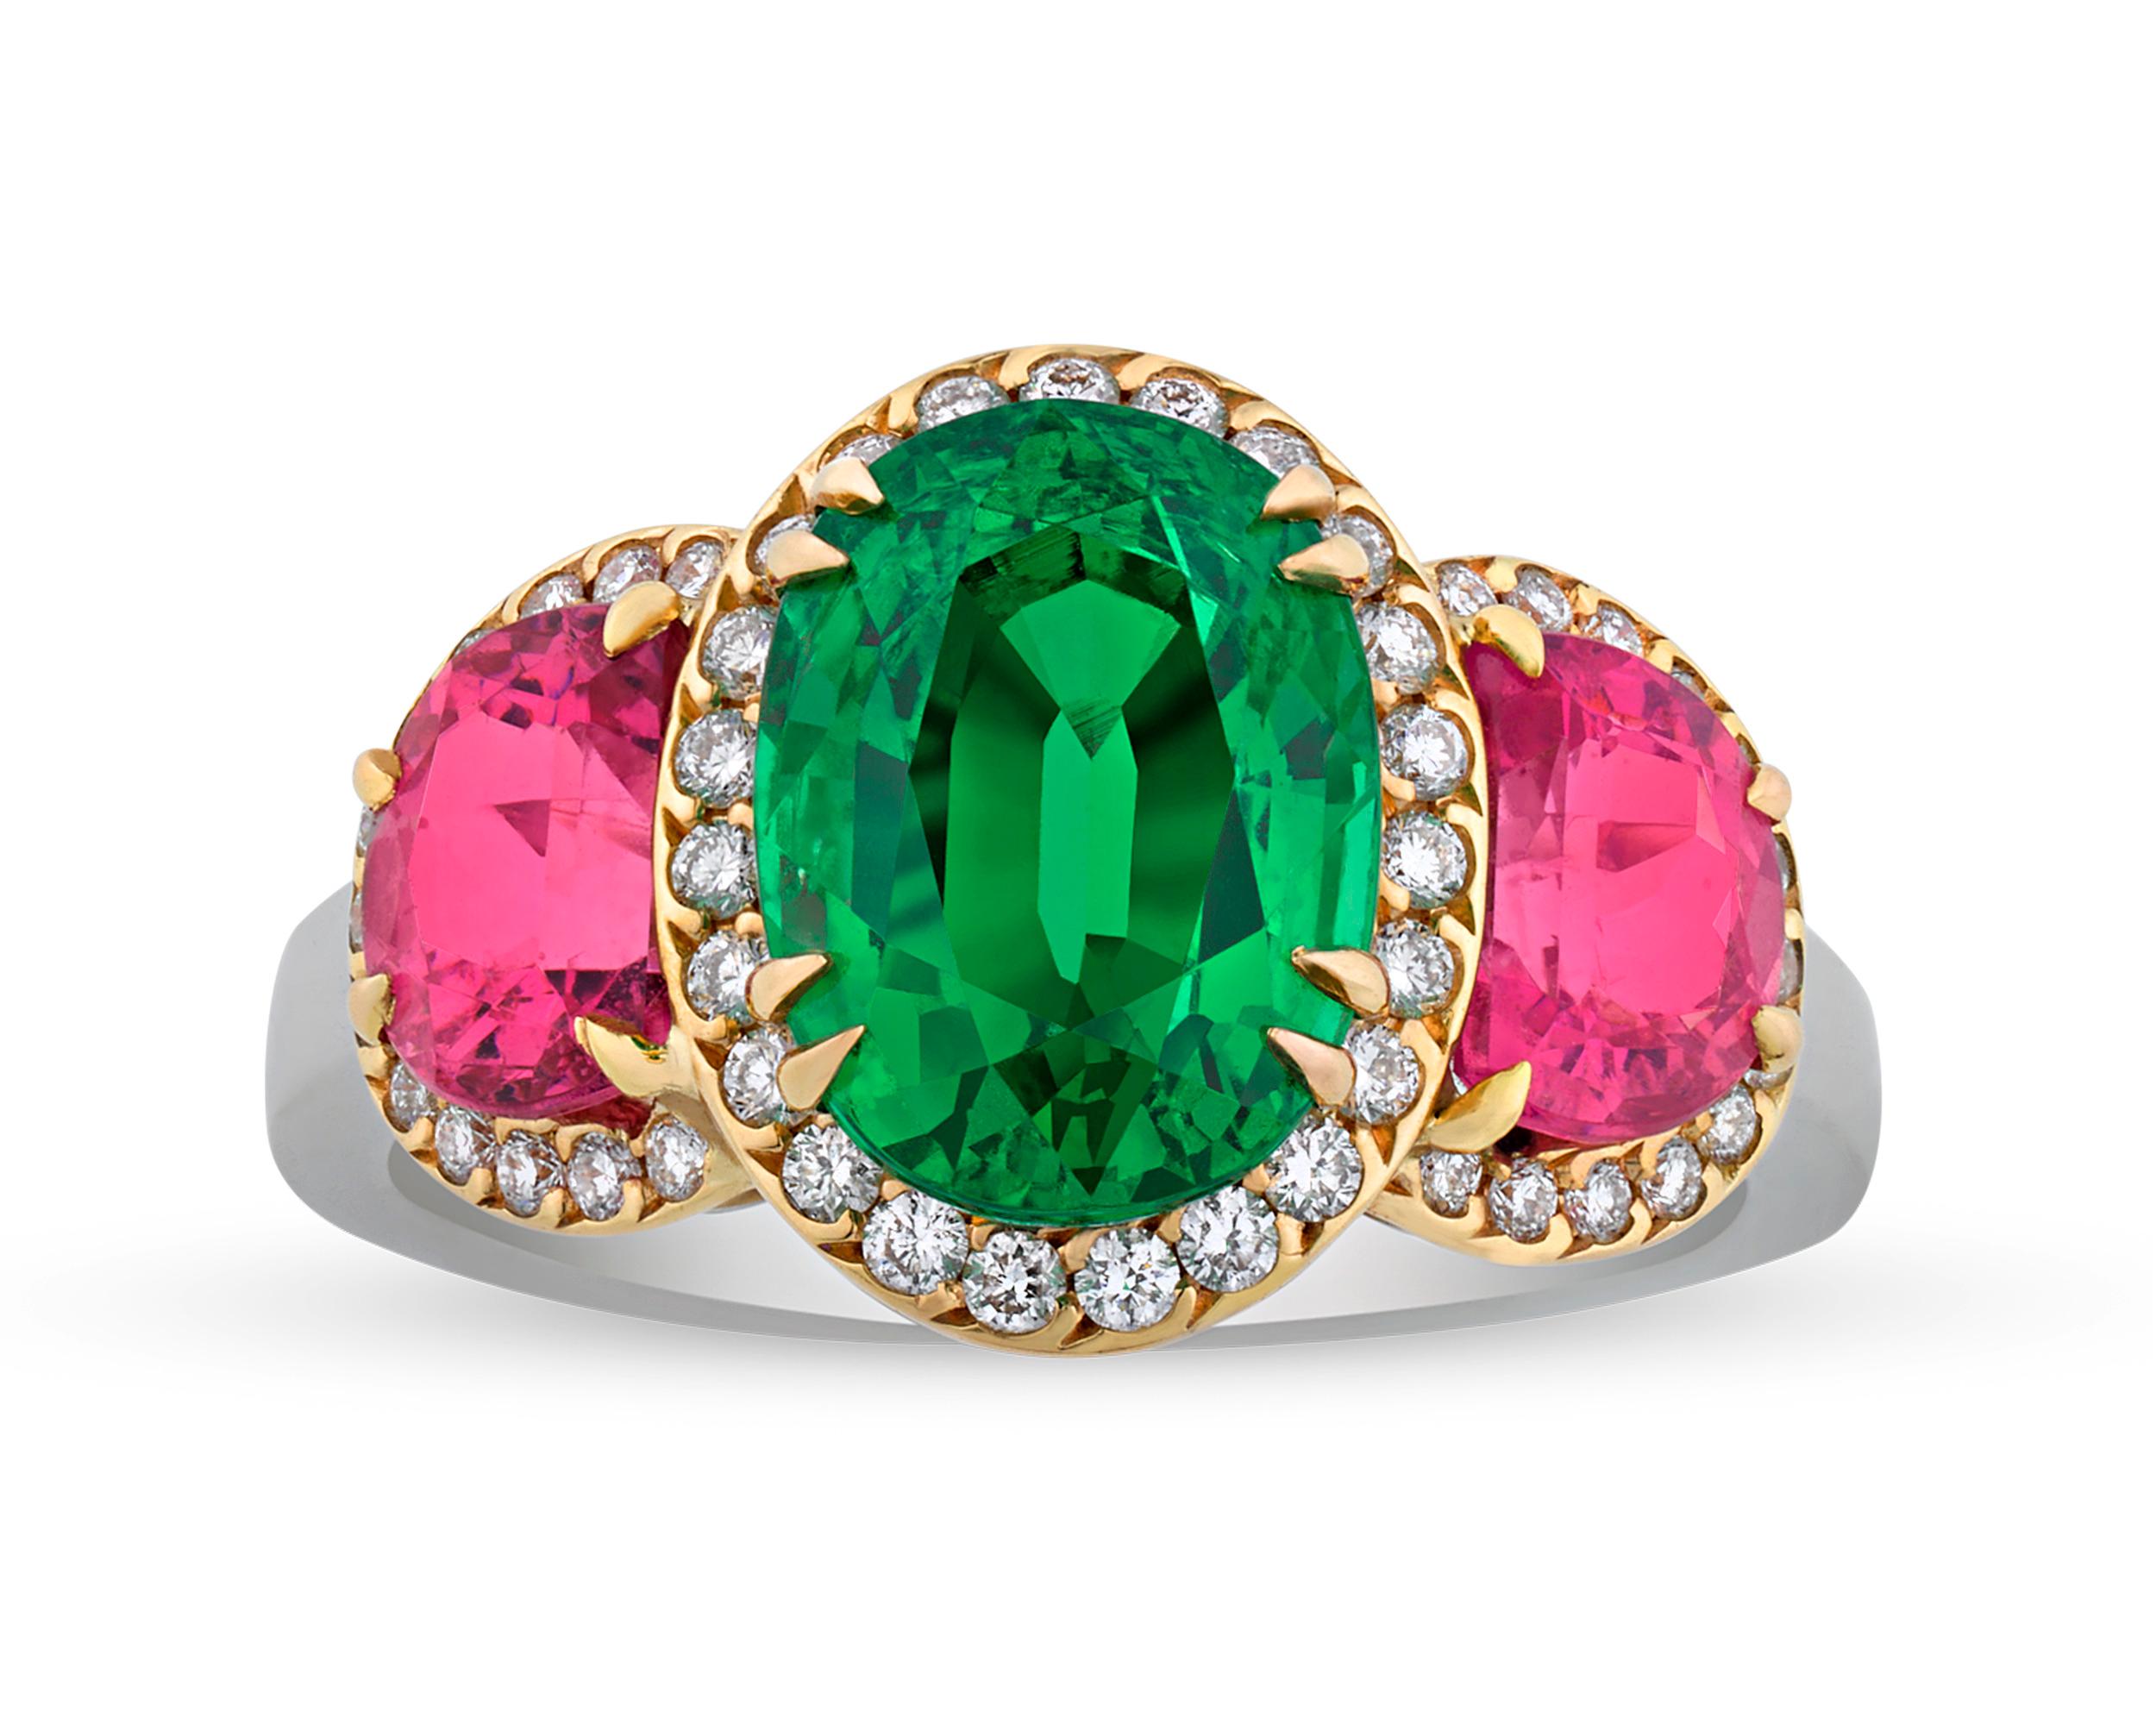 This eye-catching ring celebrates color, contrasting the rich emerald green of a tsavorite garnet with the spirited pink of a Mahenge spinel. The natural tsavorite at the center, weighing 3.89 carats, is perfectly complemented by two natural Mahenge